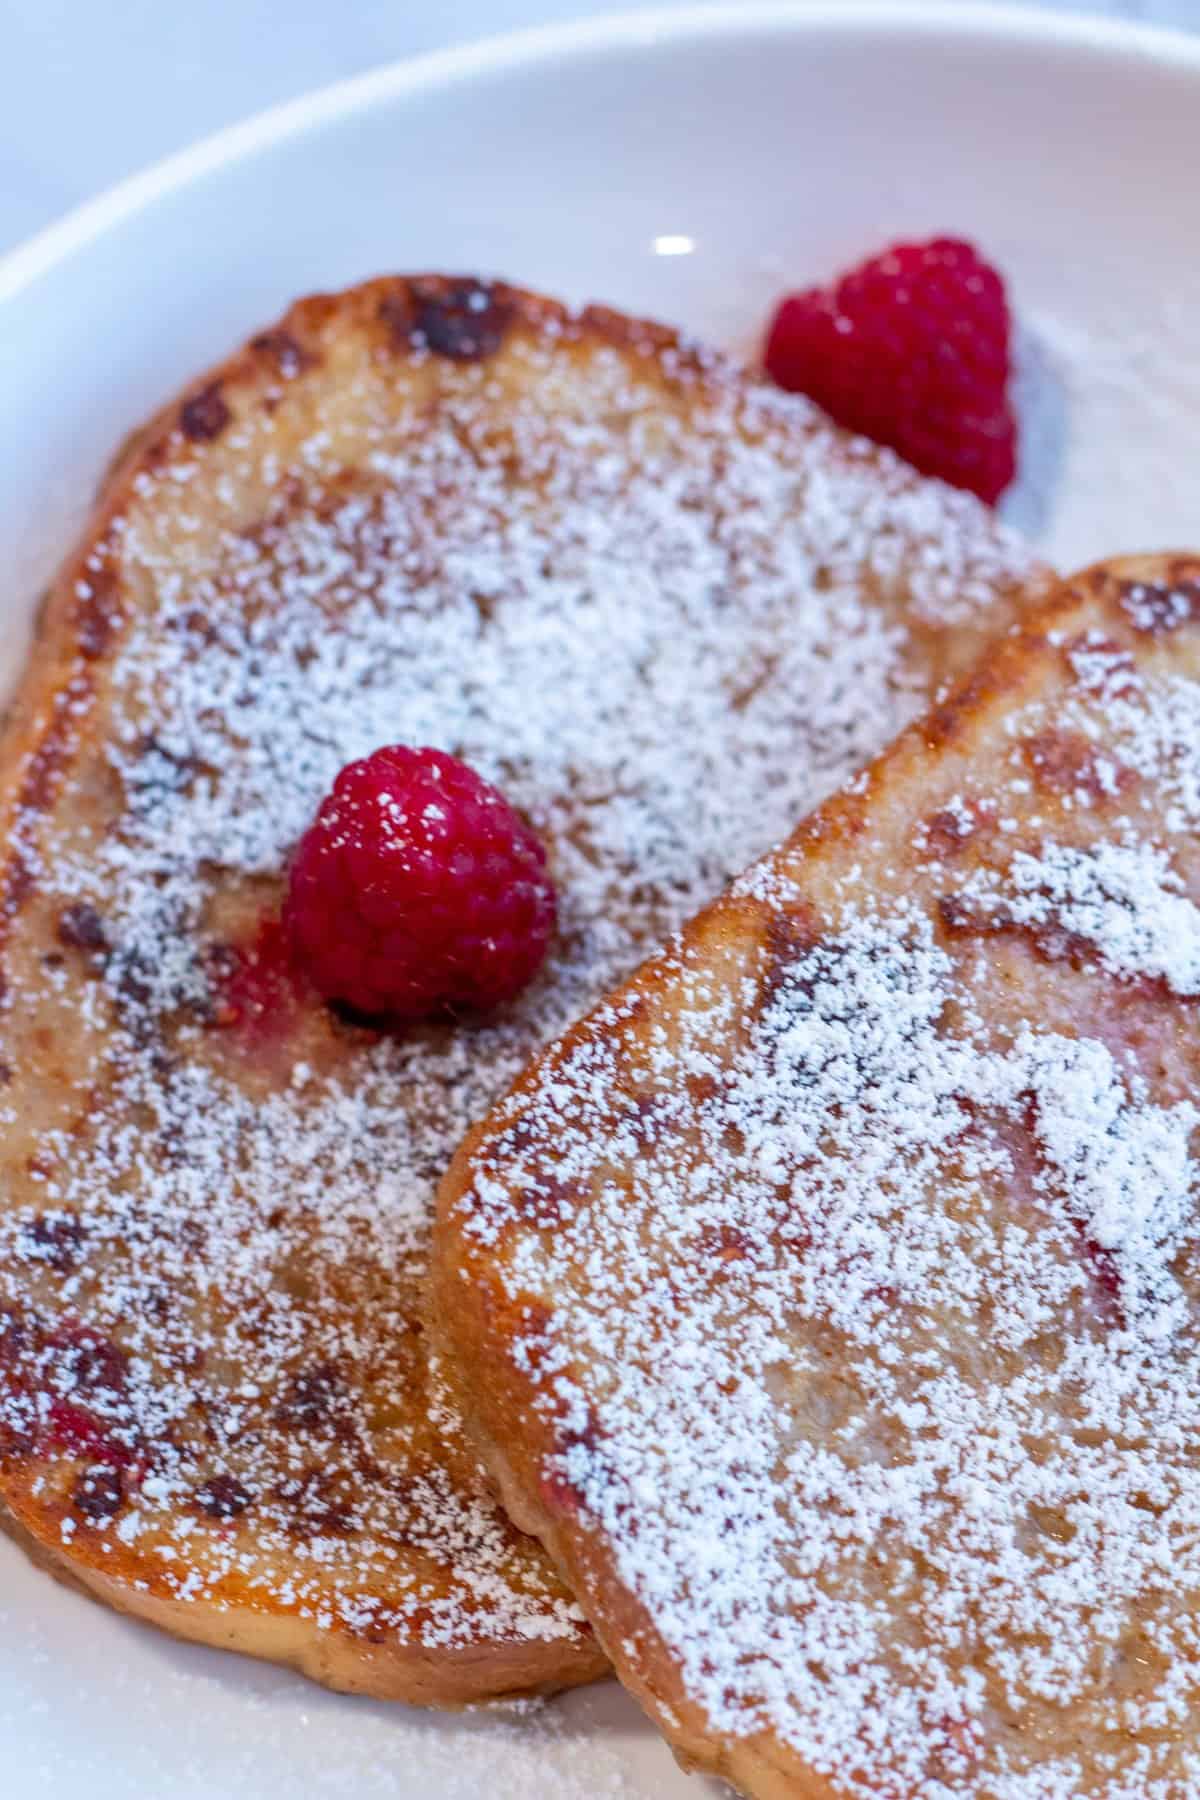 Raspberry french toast served with powdered sugar and raspberries on top.